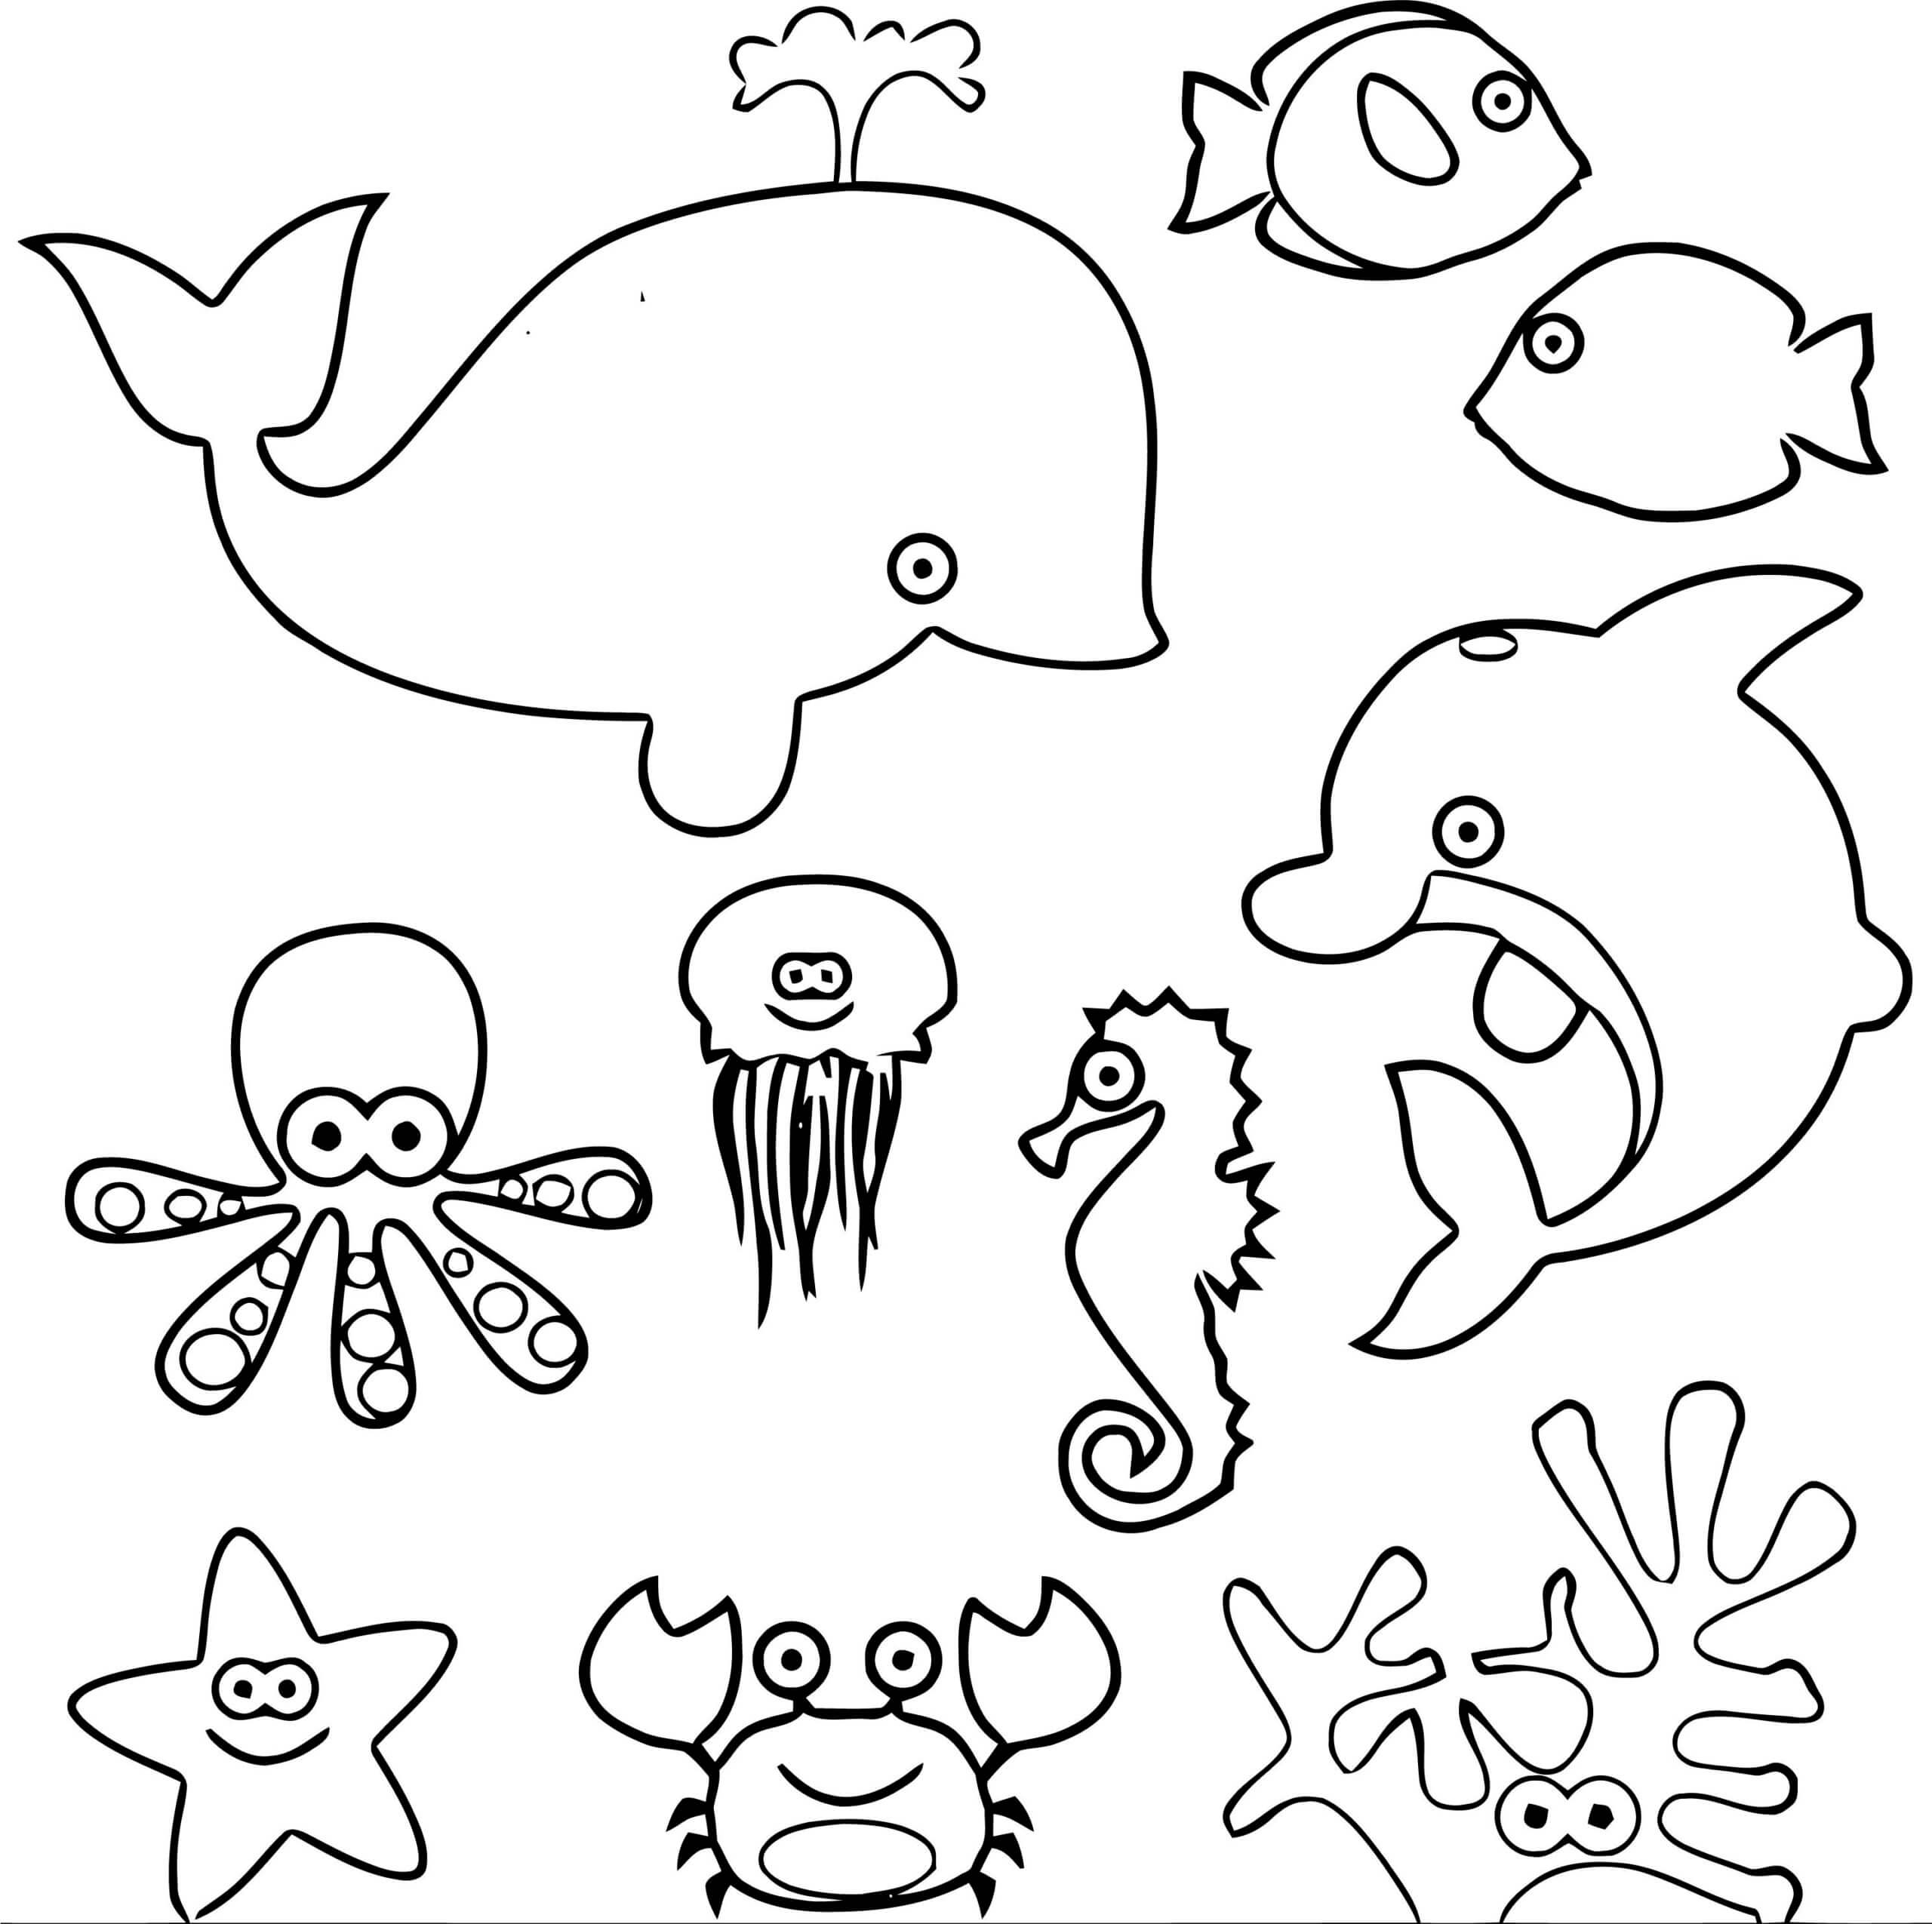 Easy and Interesting Sea Animal Coloring Pages for Kids Combining The Sea Creatures